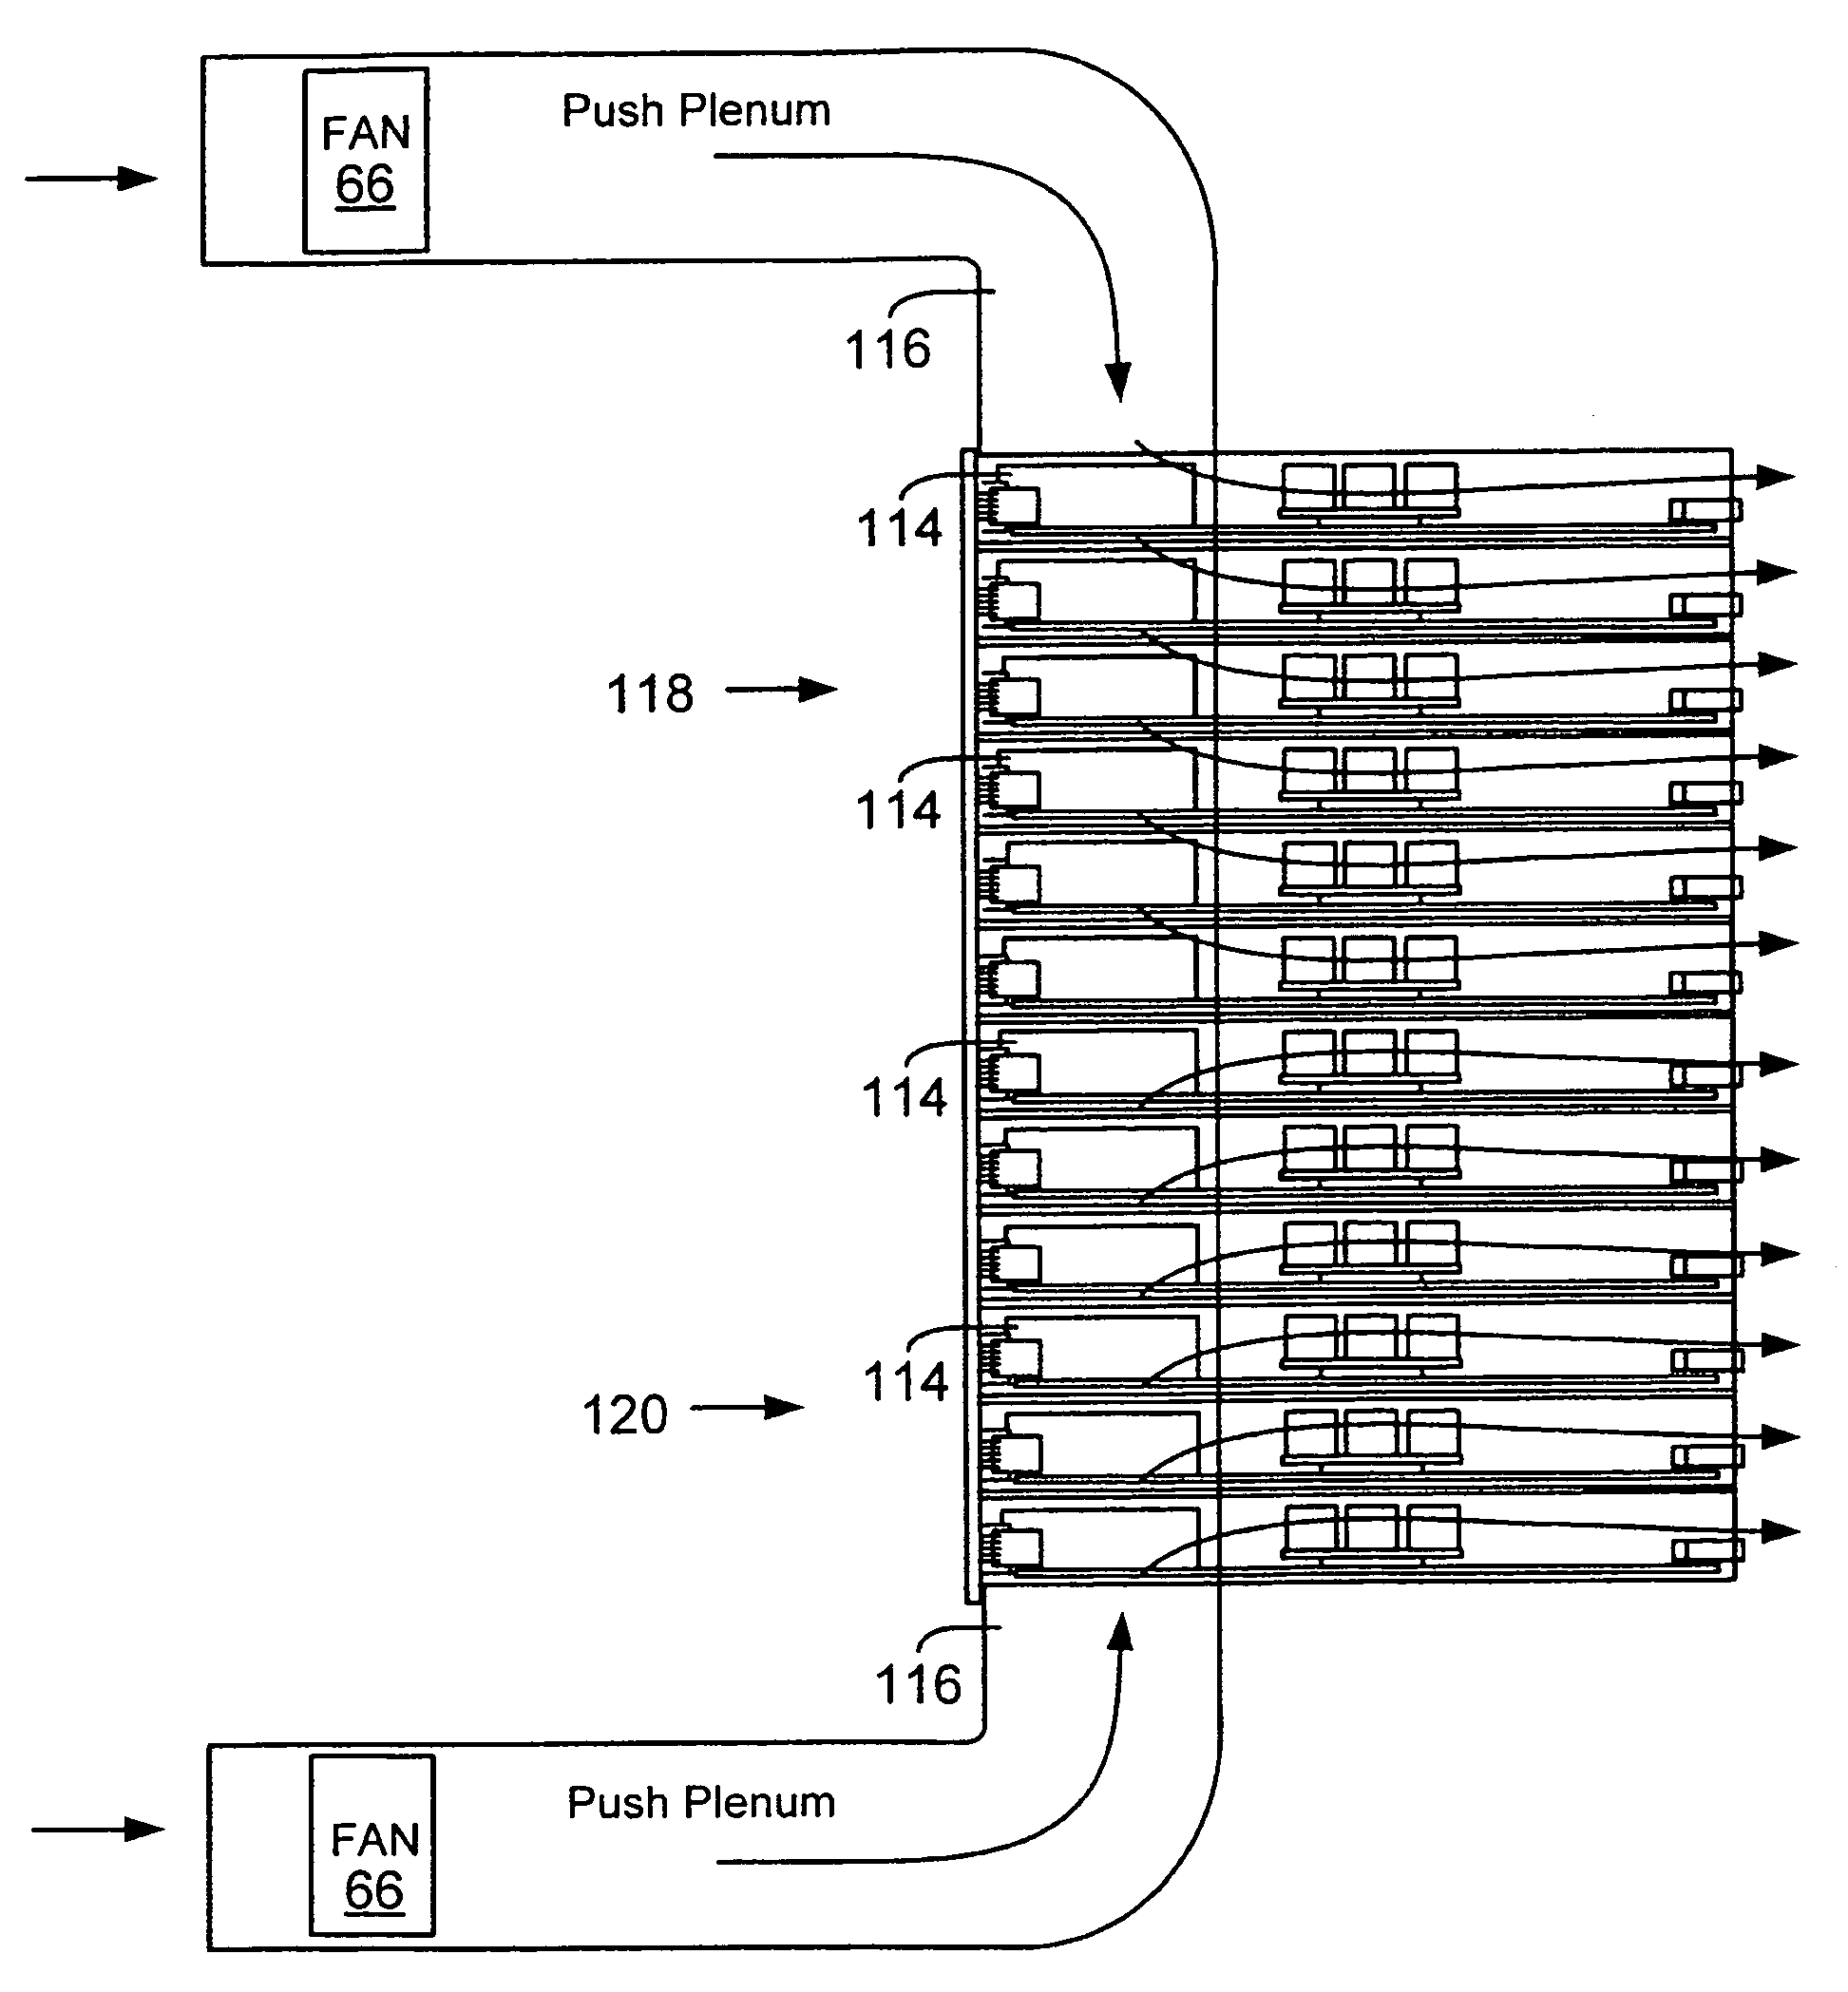 Apparatus and methods for cooling network switches